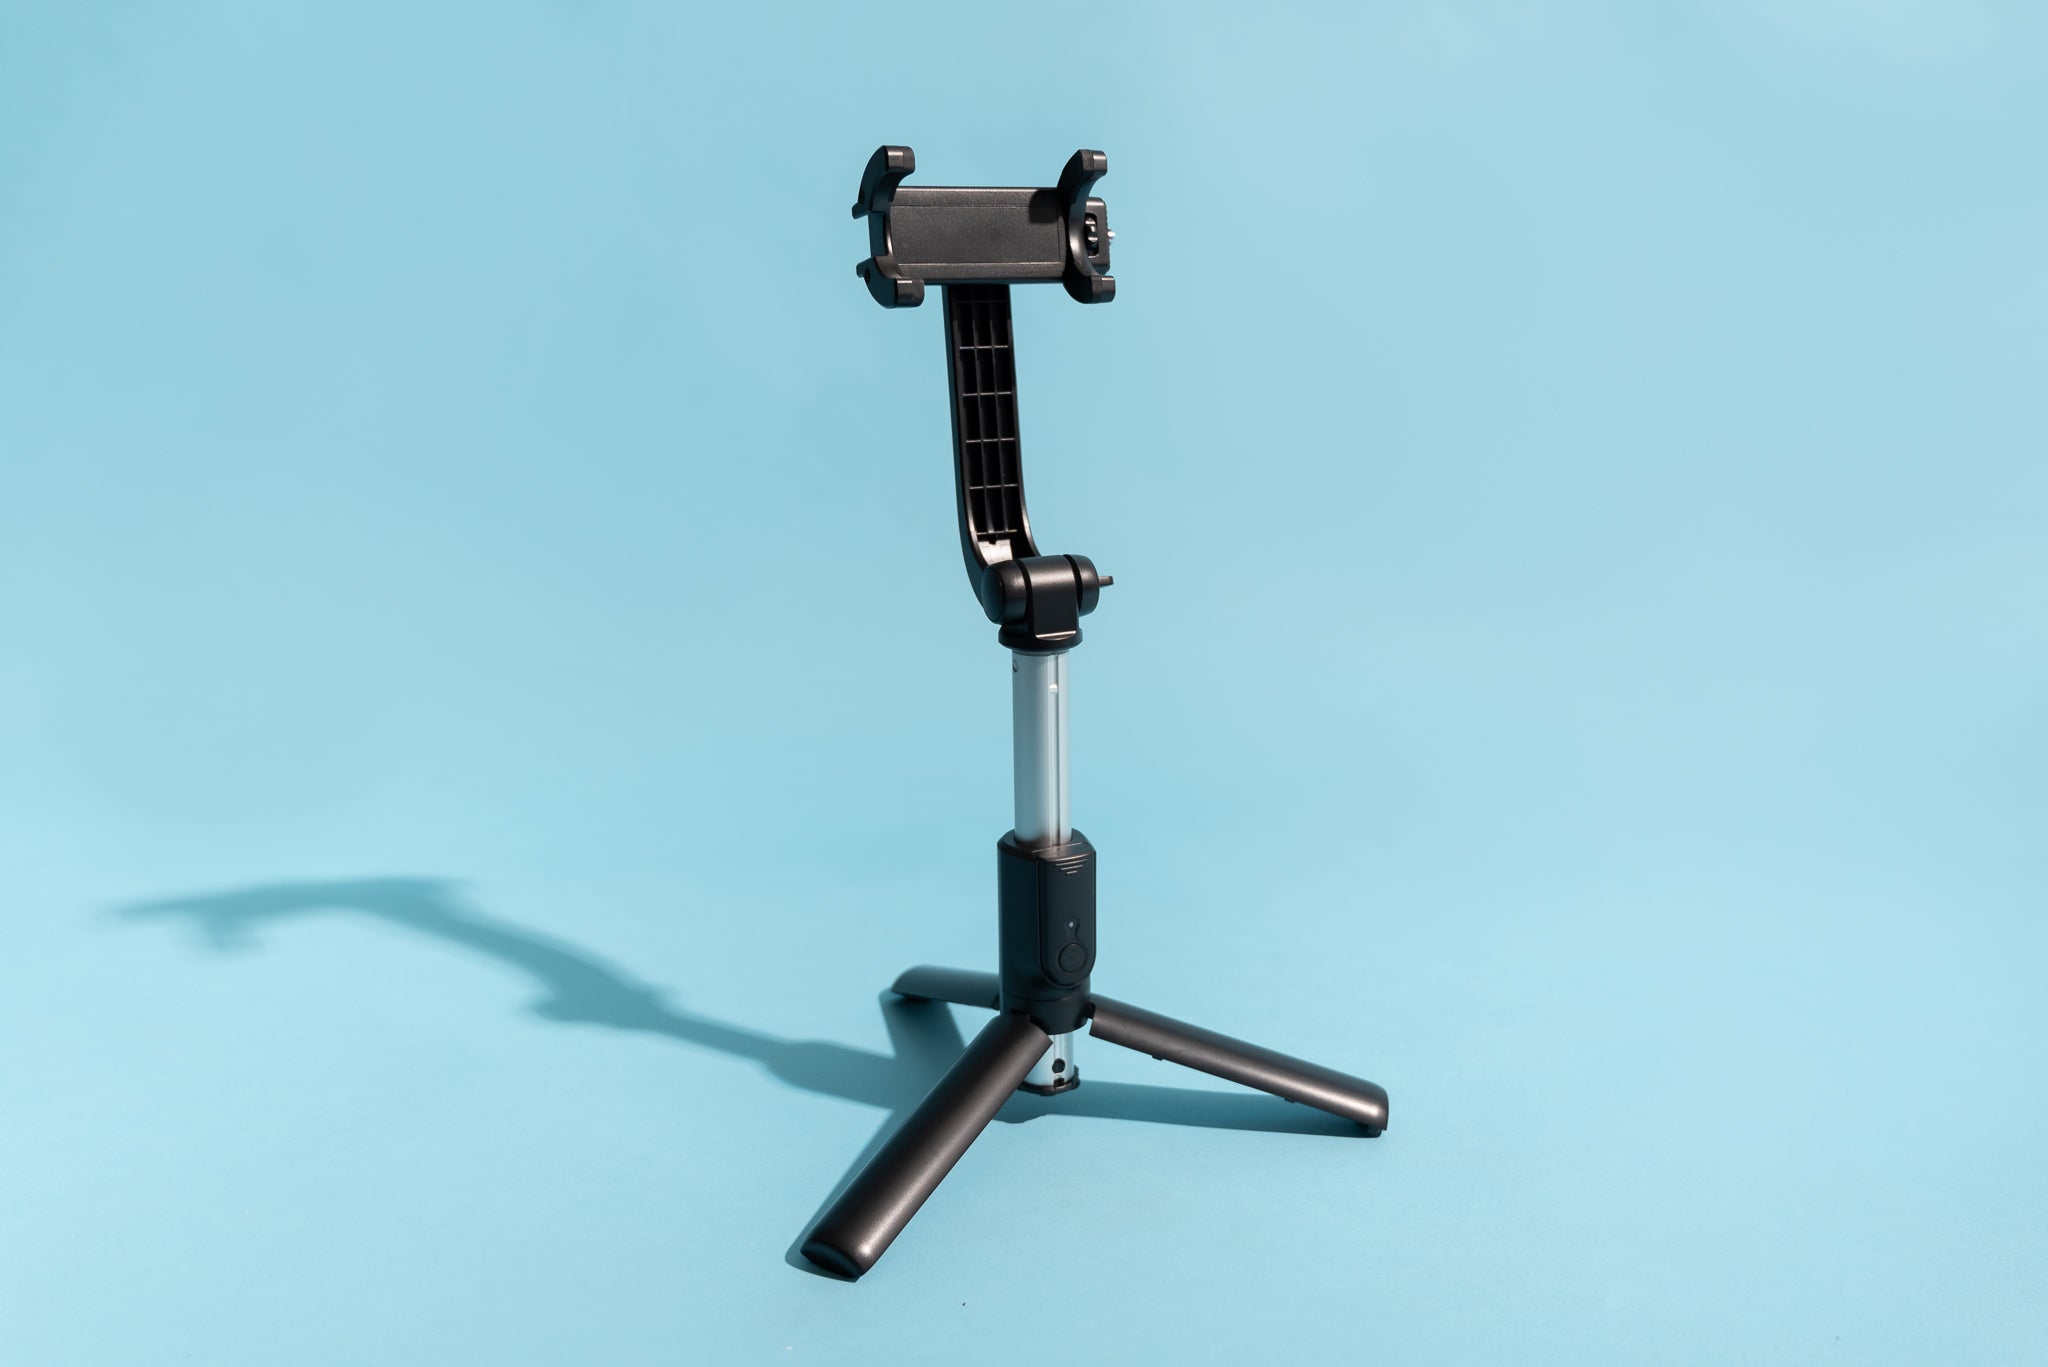 Smartphone Tripod Review: The Best Tripods for Your Phone